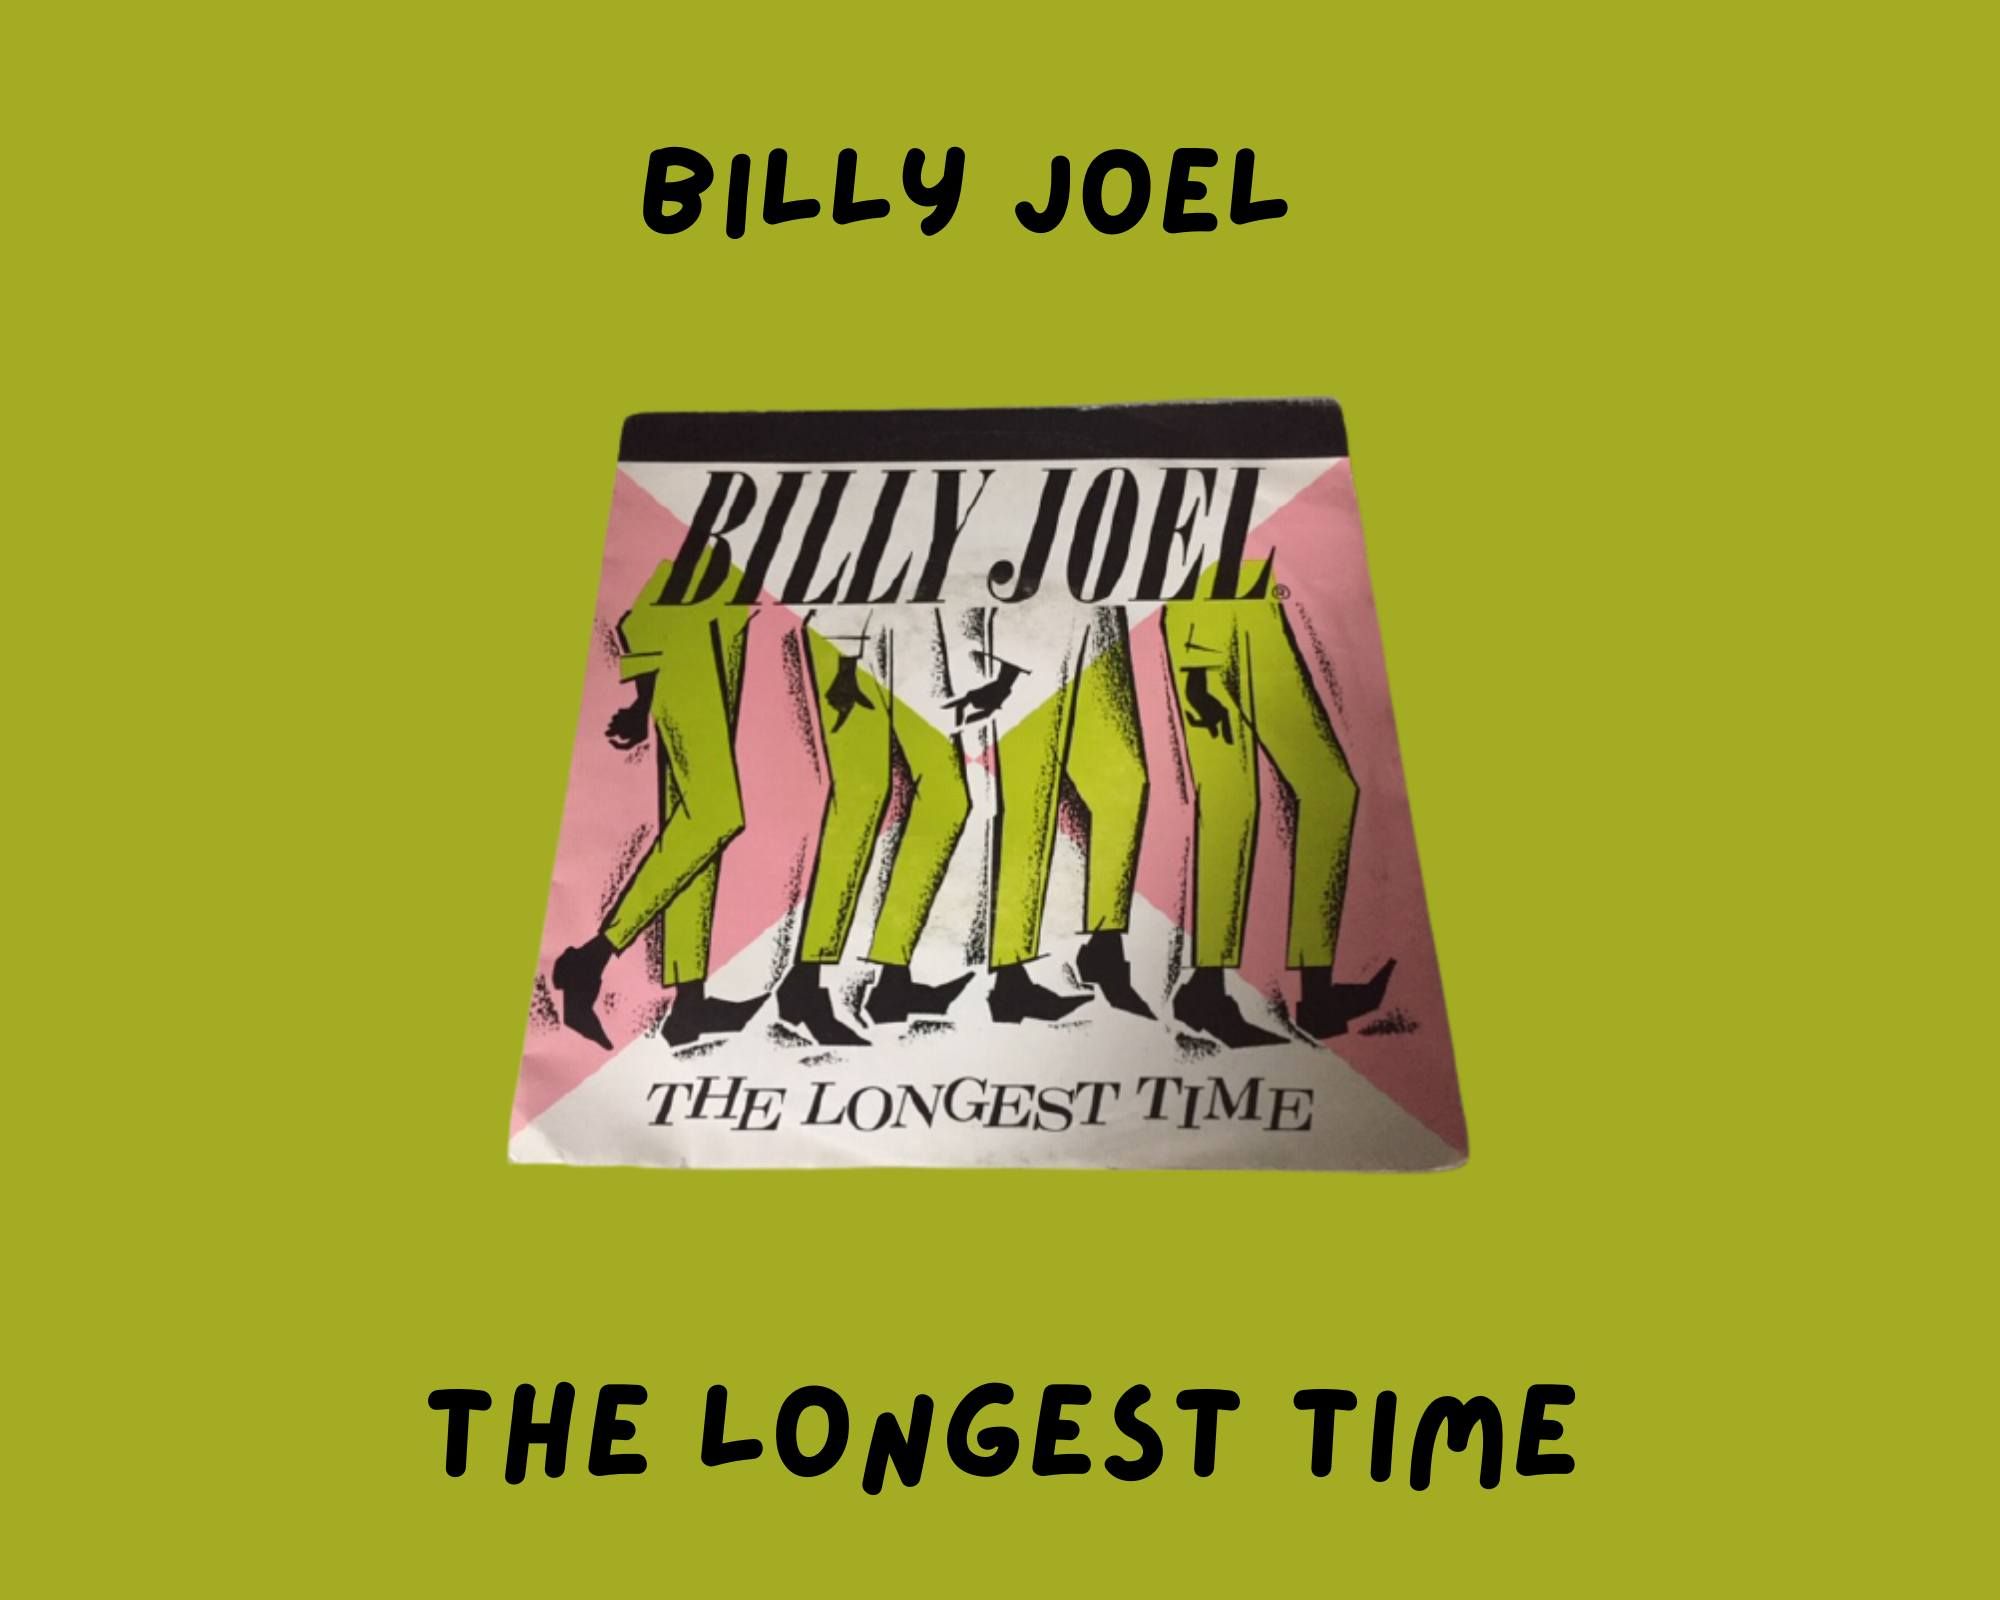 Album Cover For The Longest Time By Billy Joel